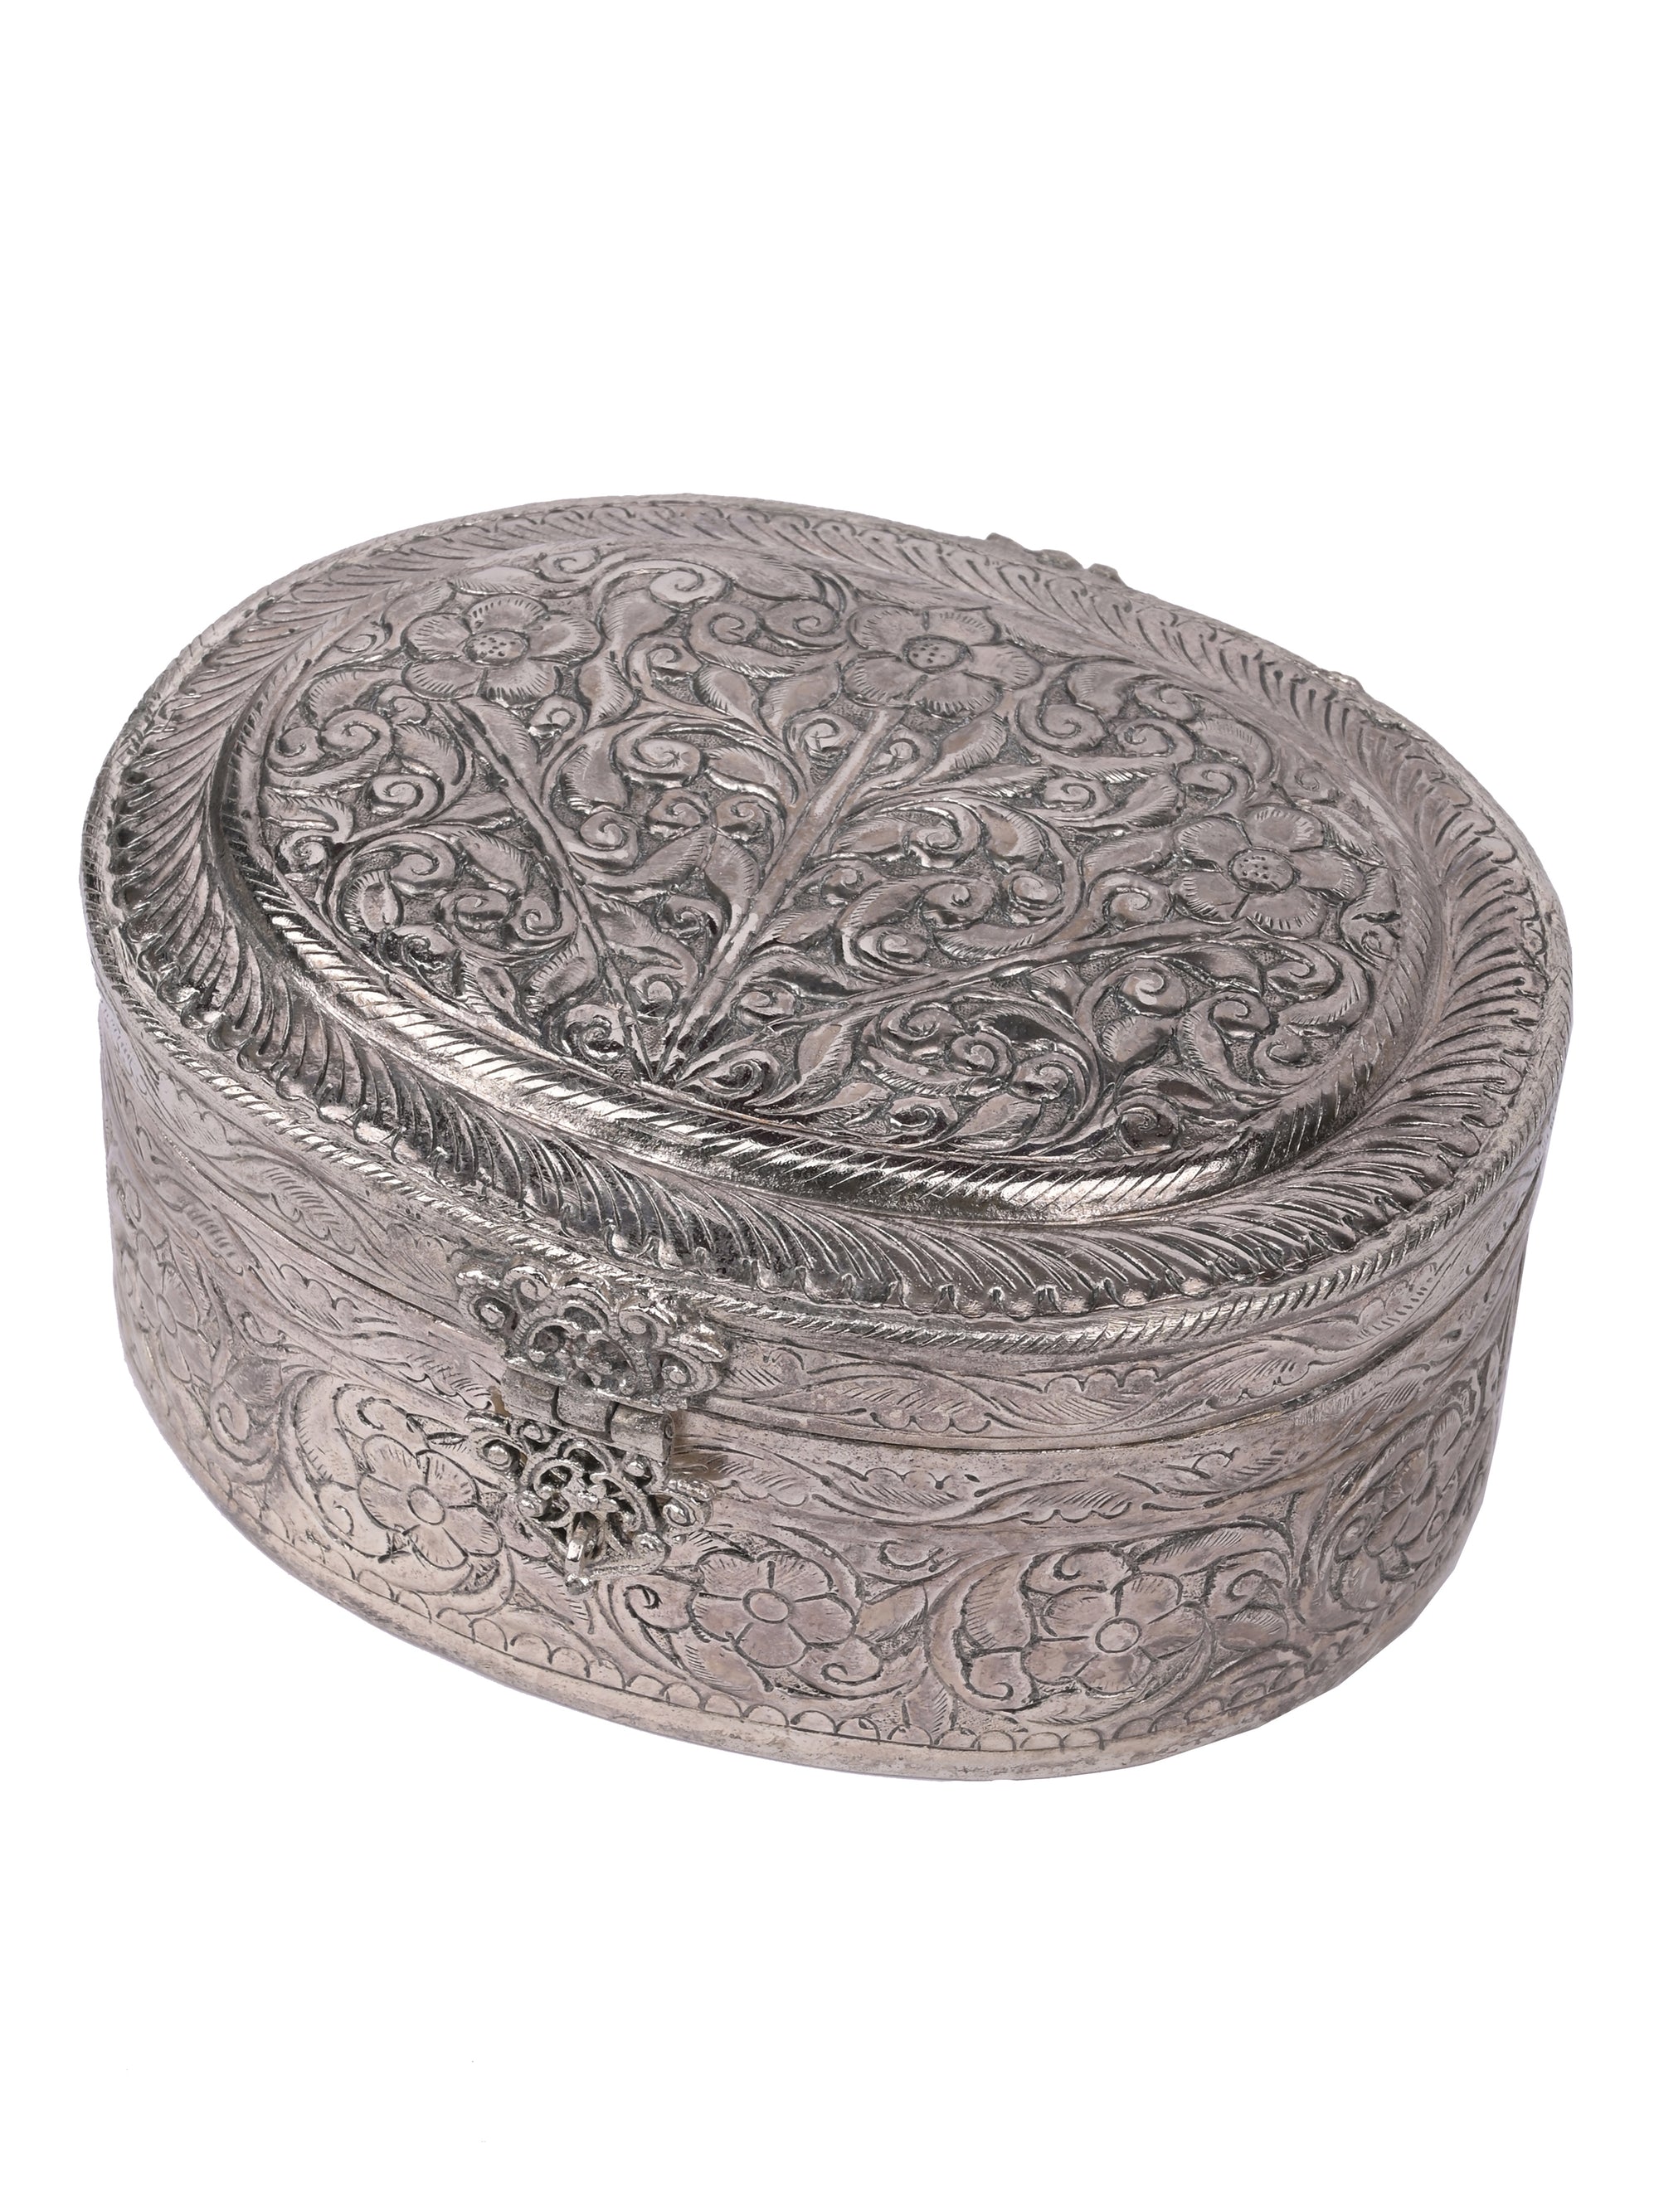 Brass crafted oval Jewellery box with oxidised silver finish - The Heritage Artifacts